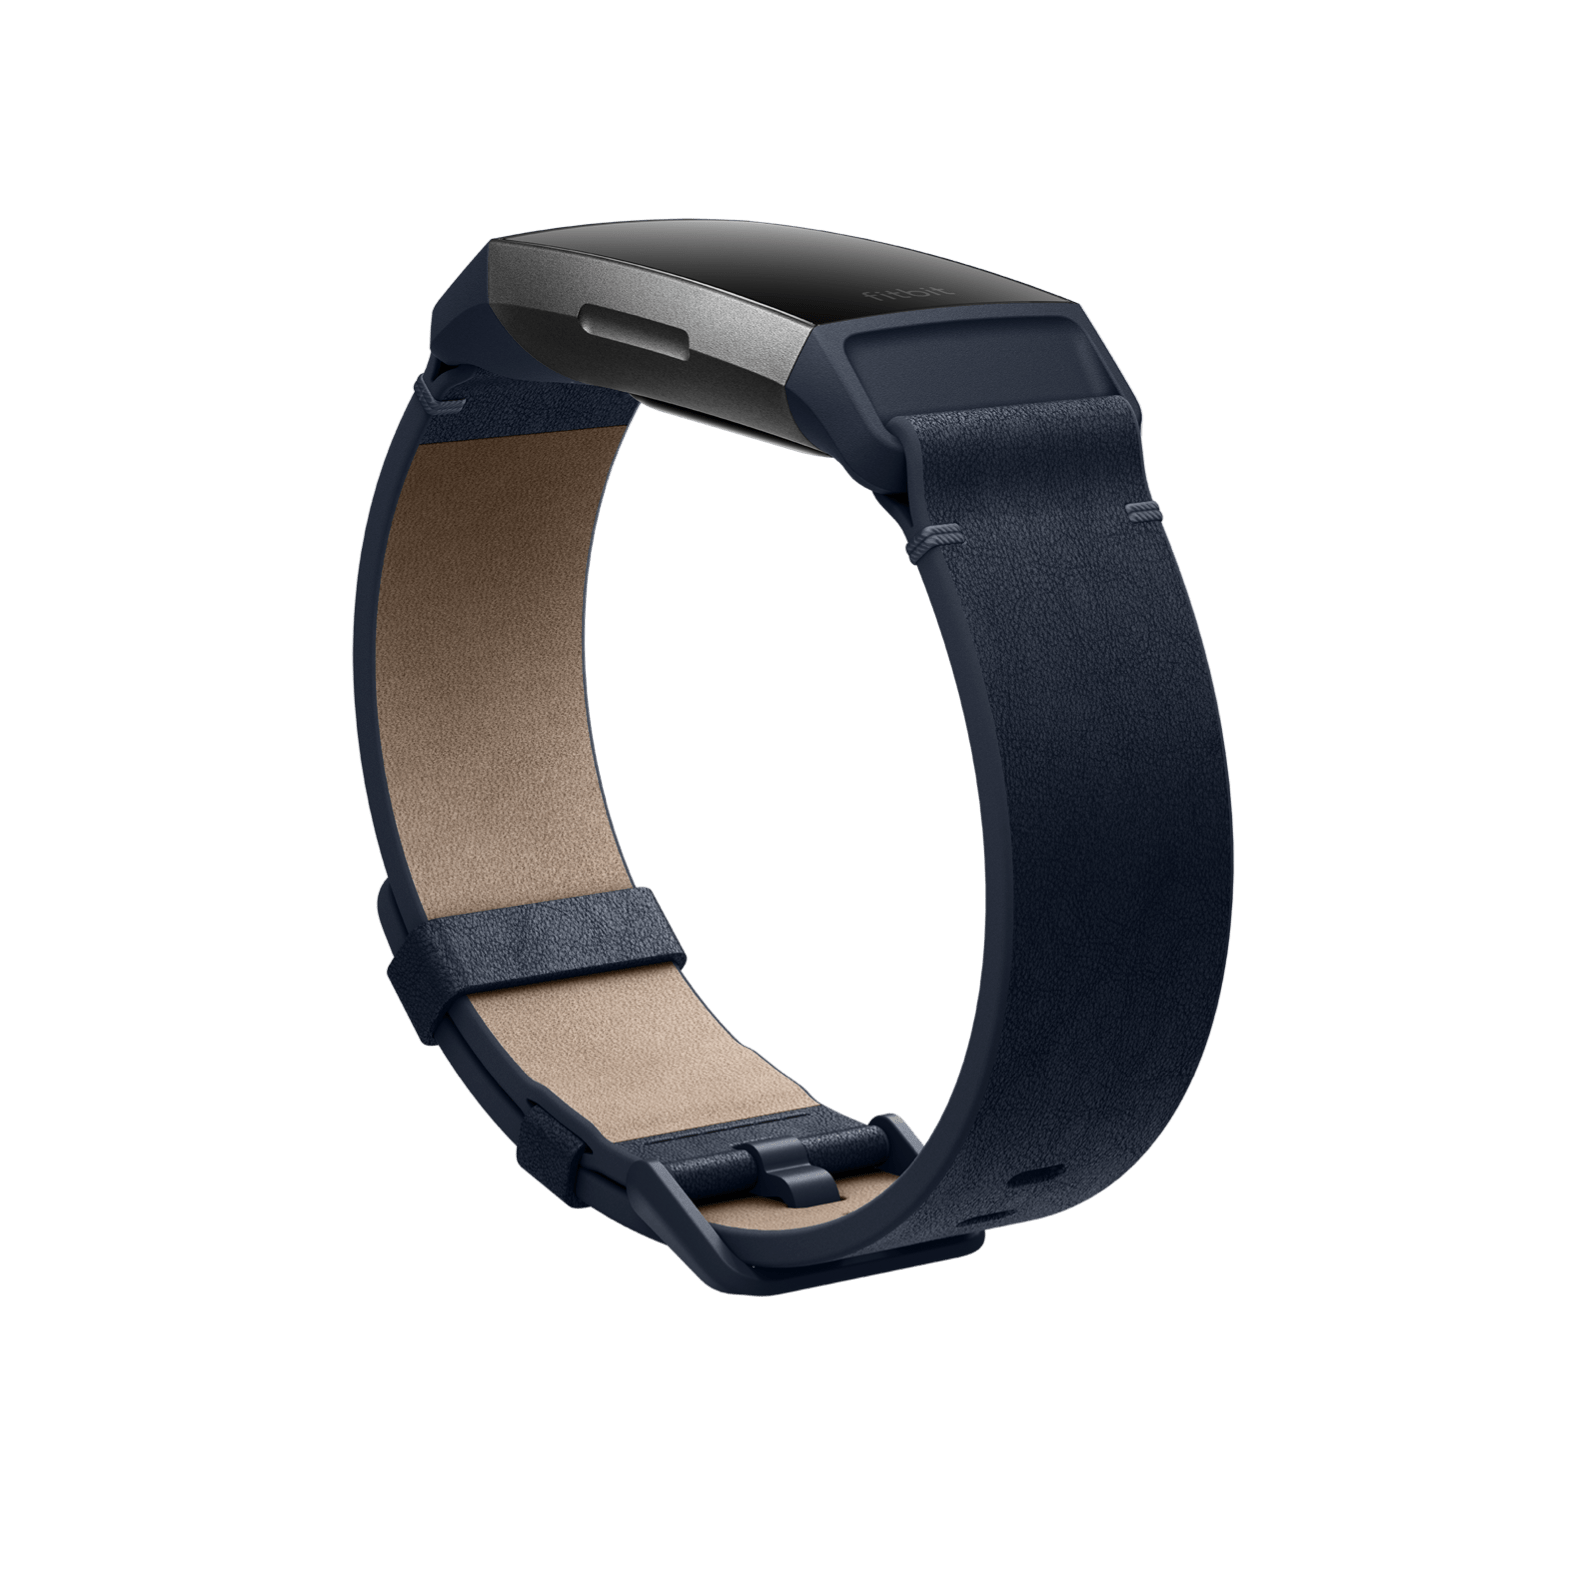 Genuine Leather Bands For Fitbit Charge 3 & 3 SE for Women Men Wristbands....... 